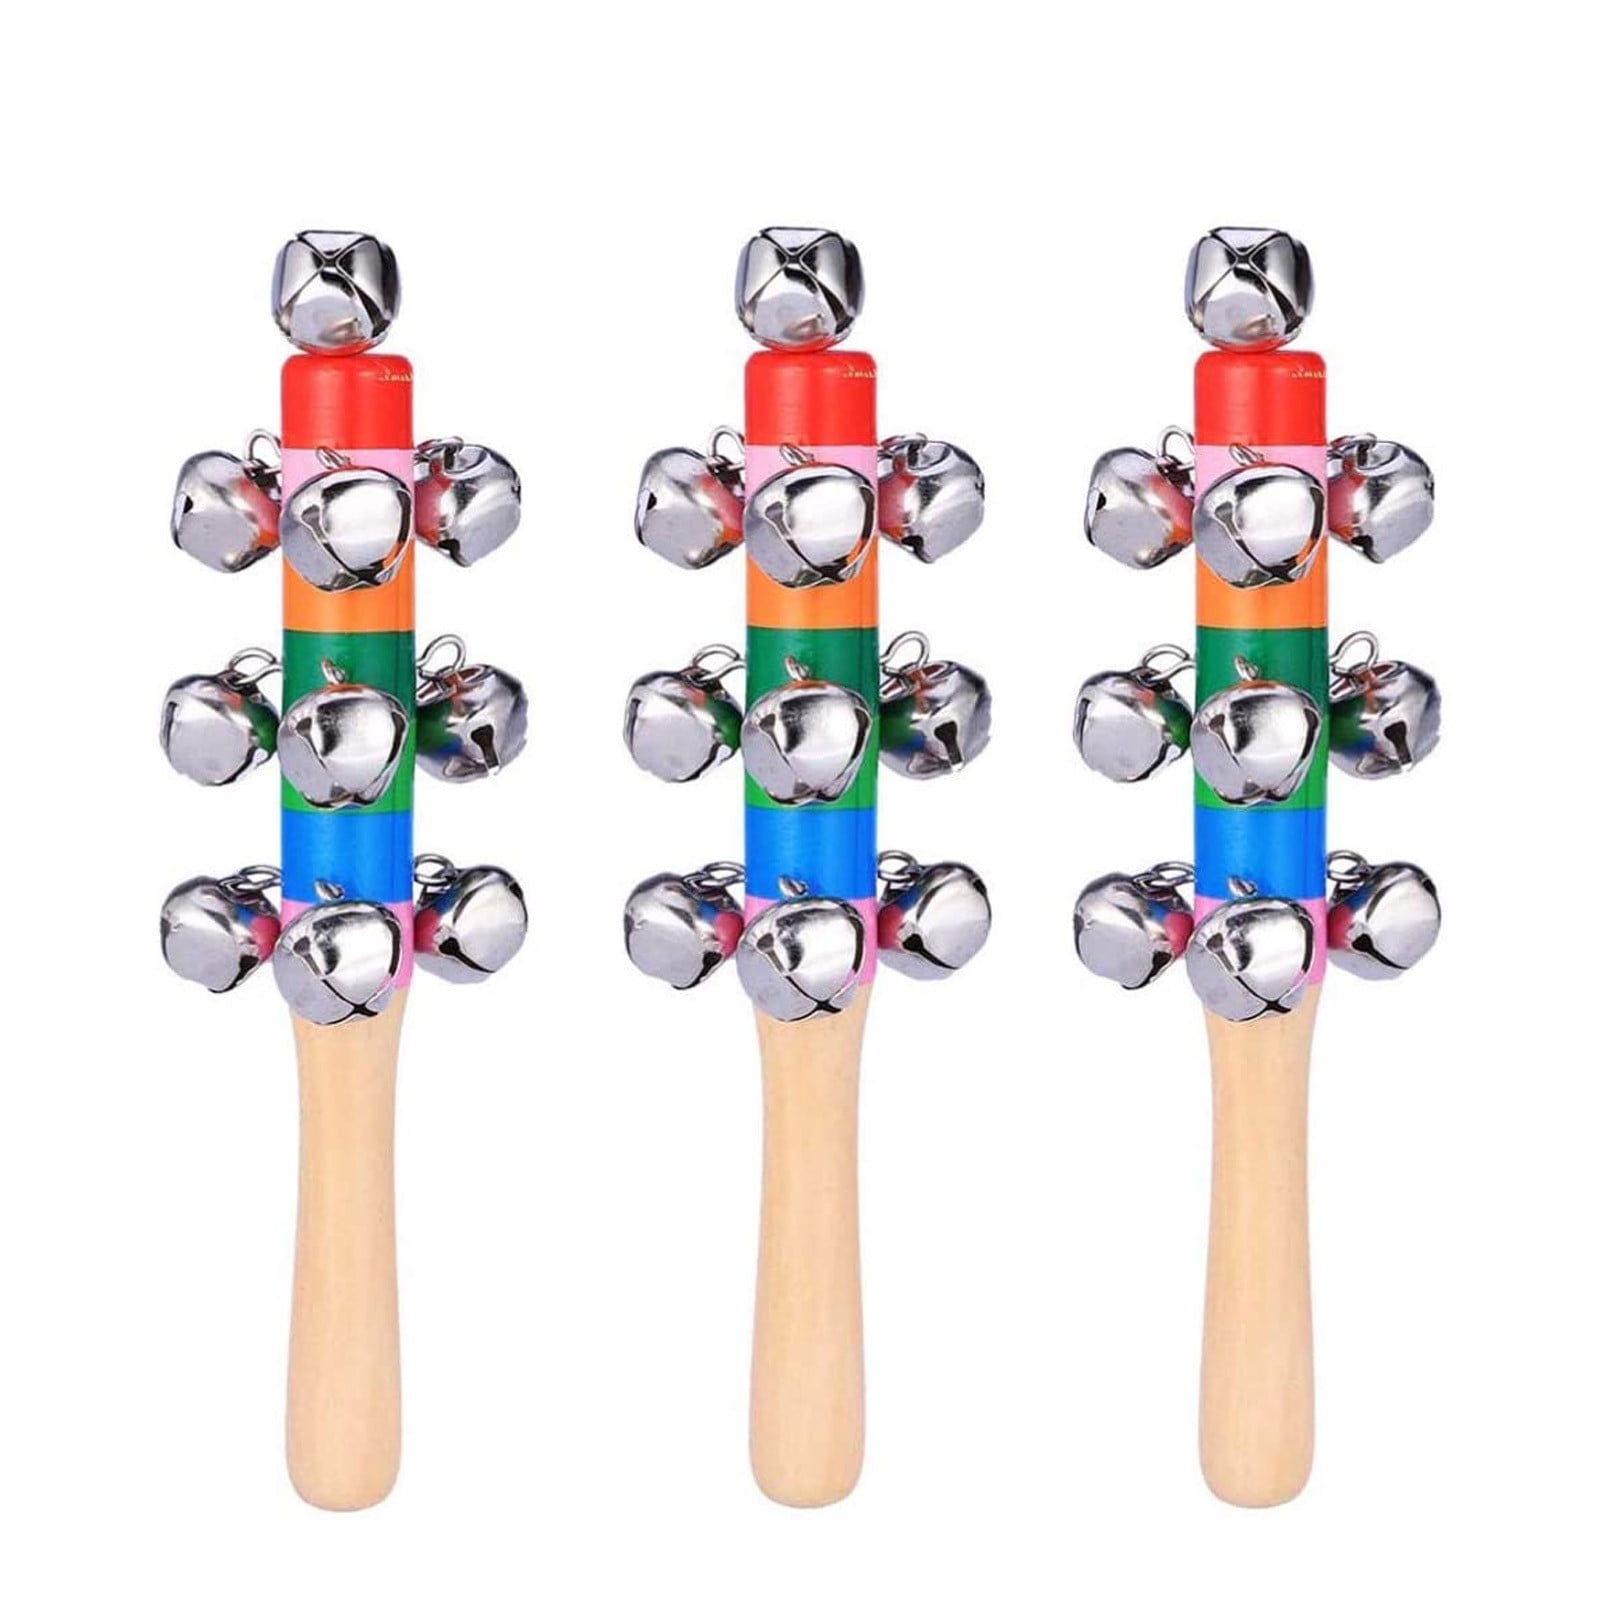 Wooden Hand Jingle Bells Rainbow Hand Sleigh Bells 3 Pcs Christmas Hand Jingle Bells Toy Hand Sleigh Bells Decoration Bells Musical Instrument for Holiday Christmas Decoration 